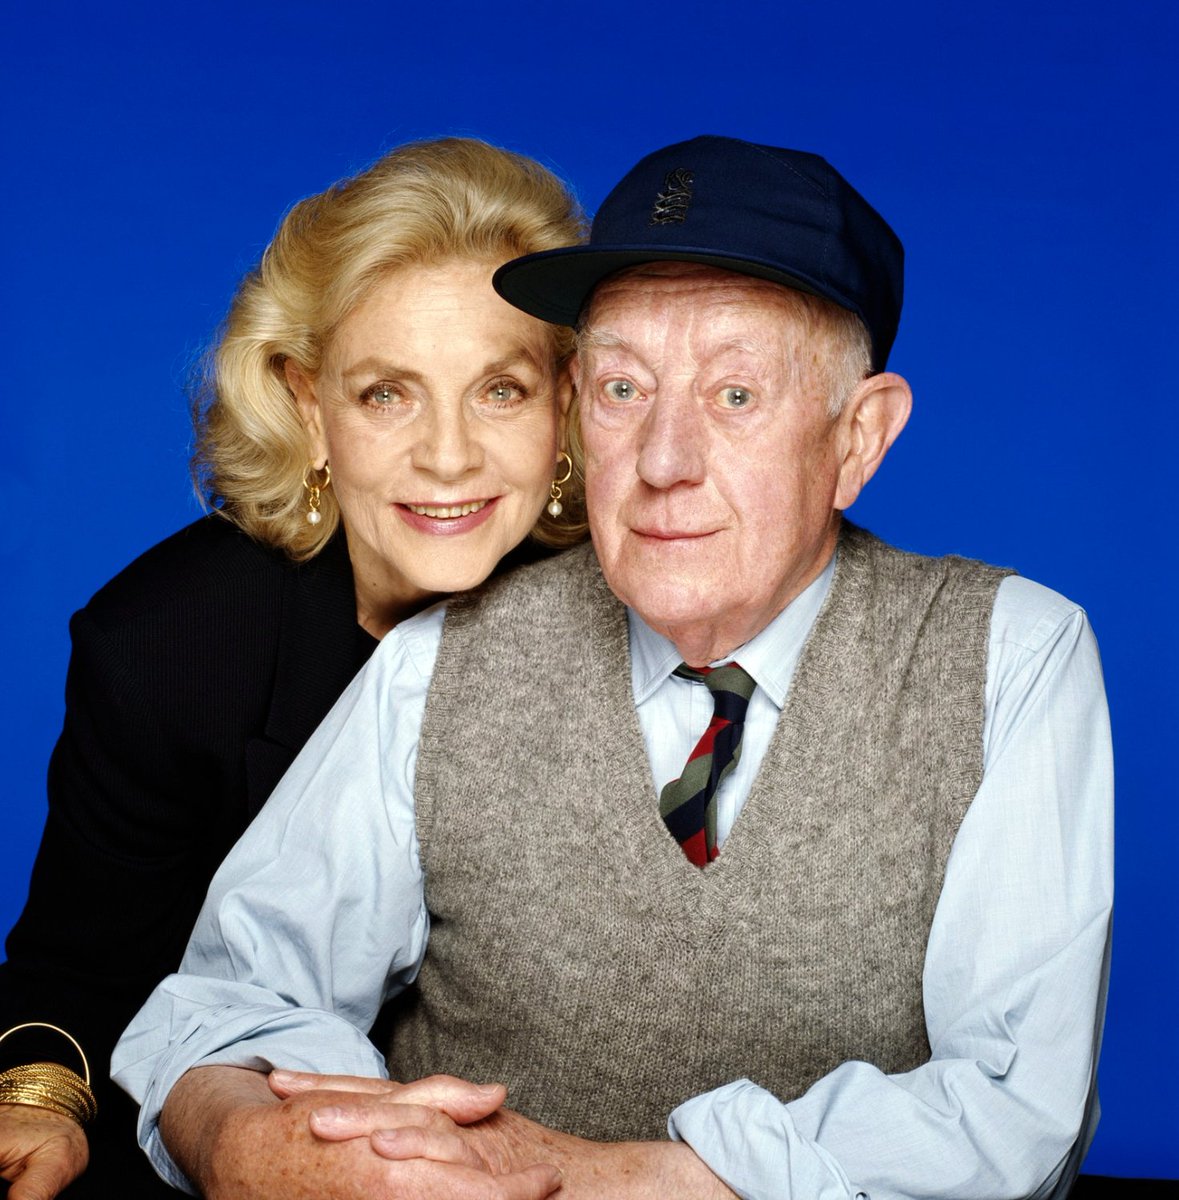 Lauren Bacall and Sir Alec Guinness, June 1993. Photo by Terry O’Neill.